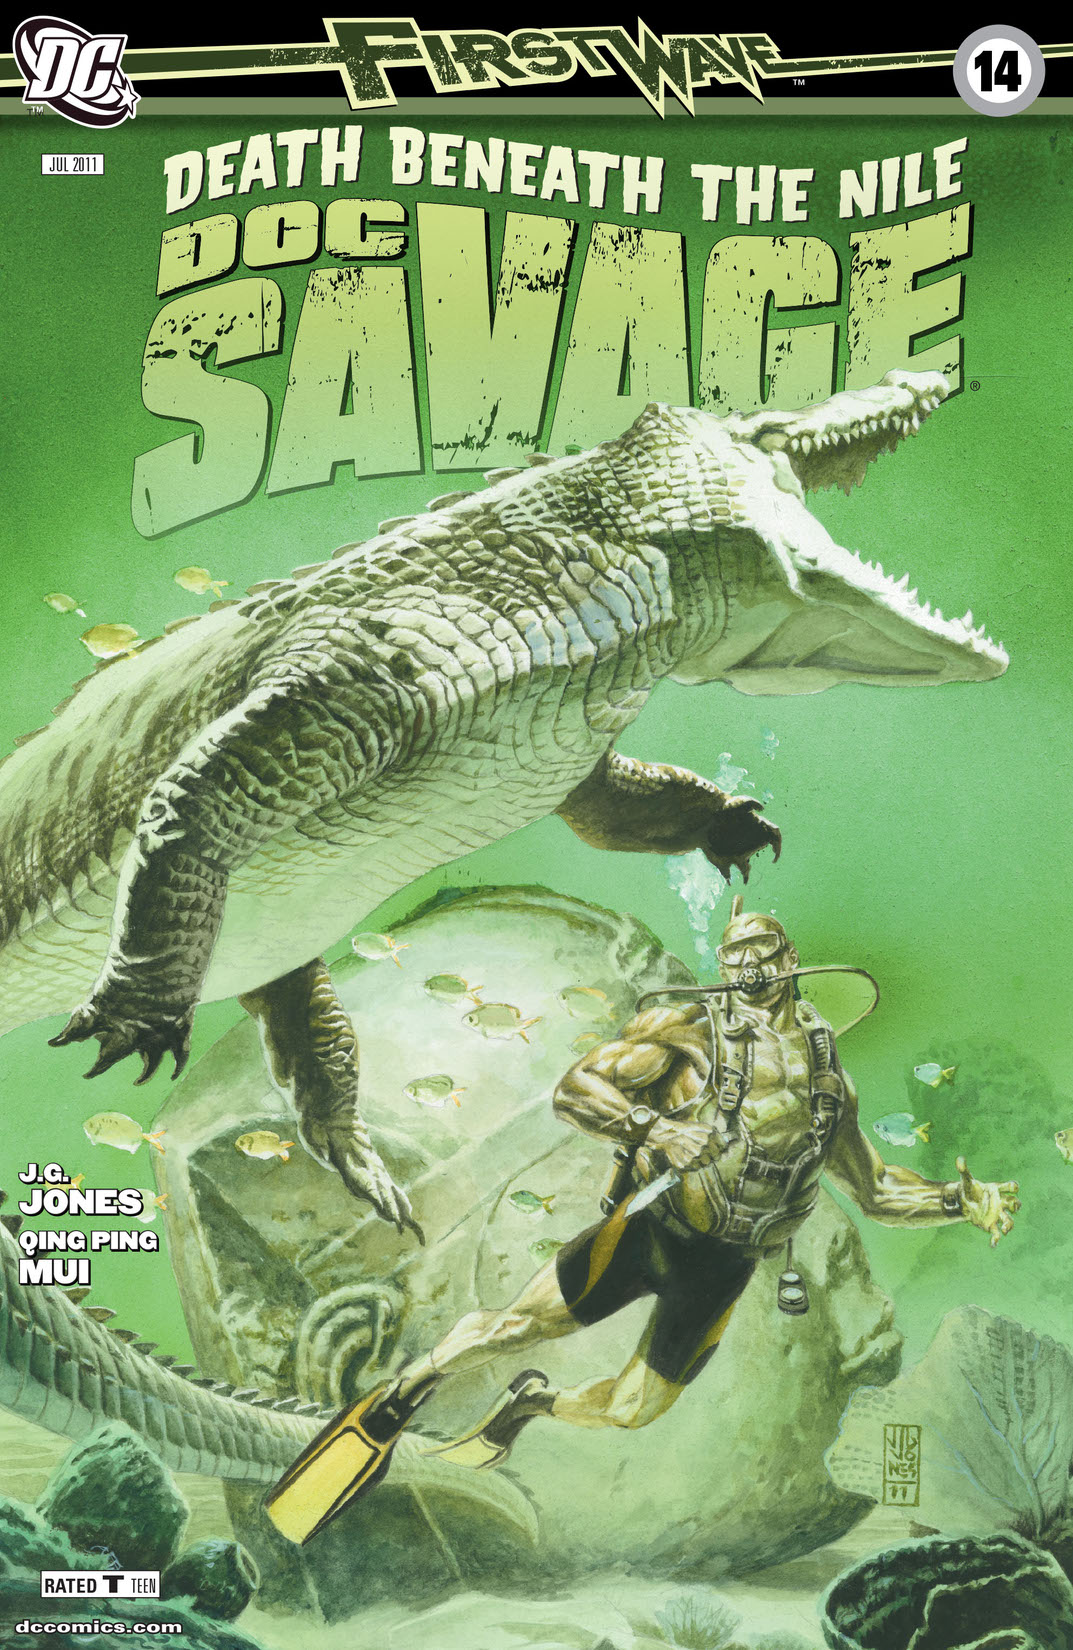 Doc Savage #14 preview images